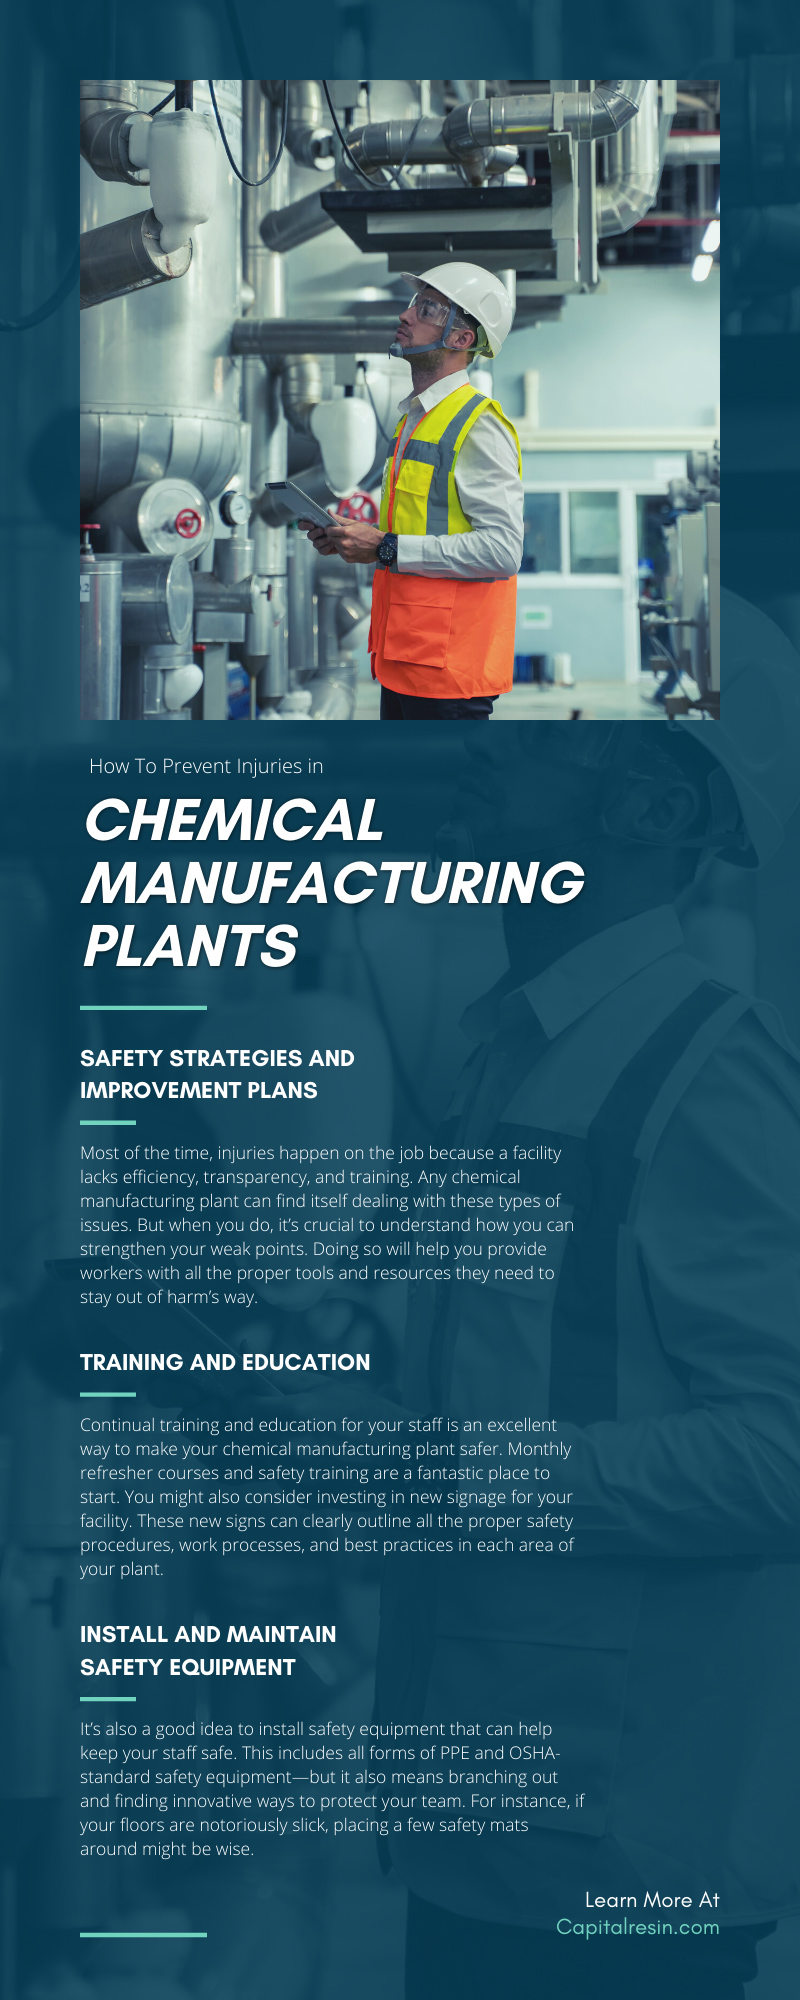 How To Prevent Injuries in Chemical Manufacturing Plants